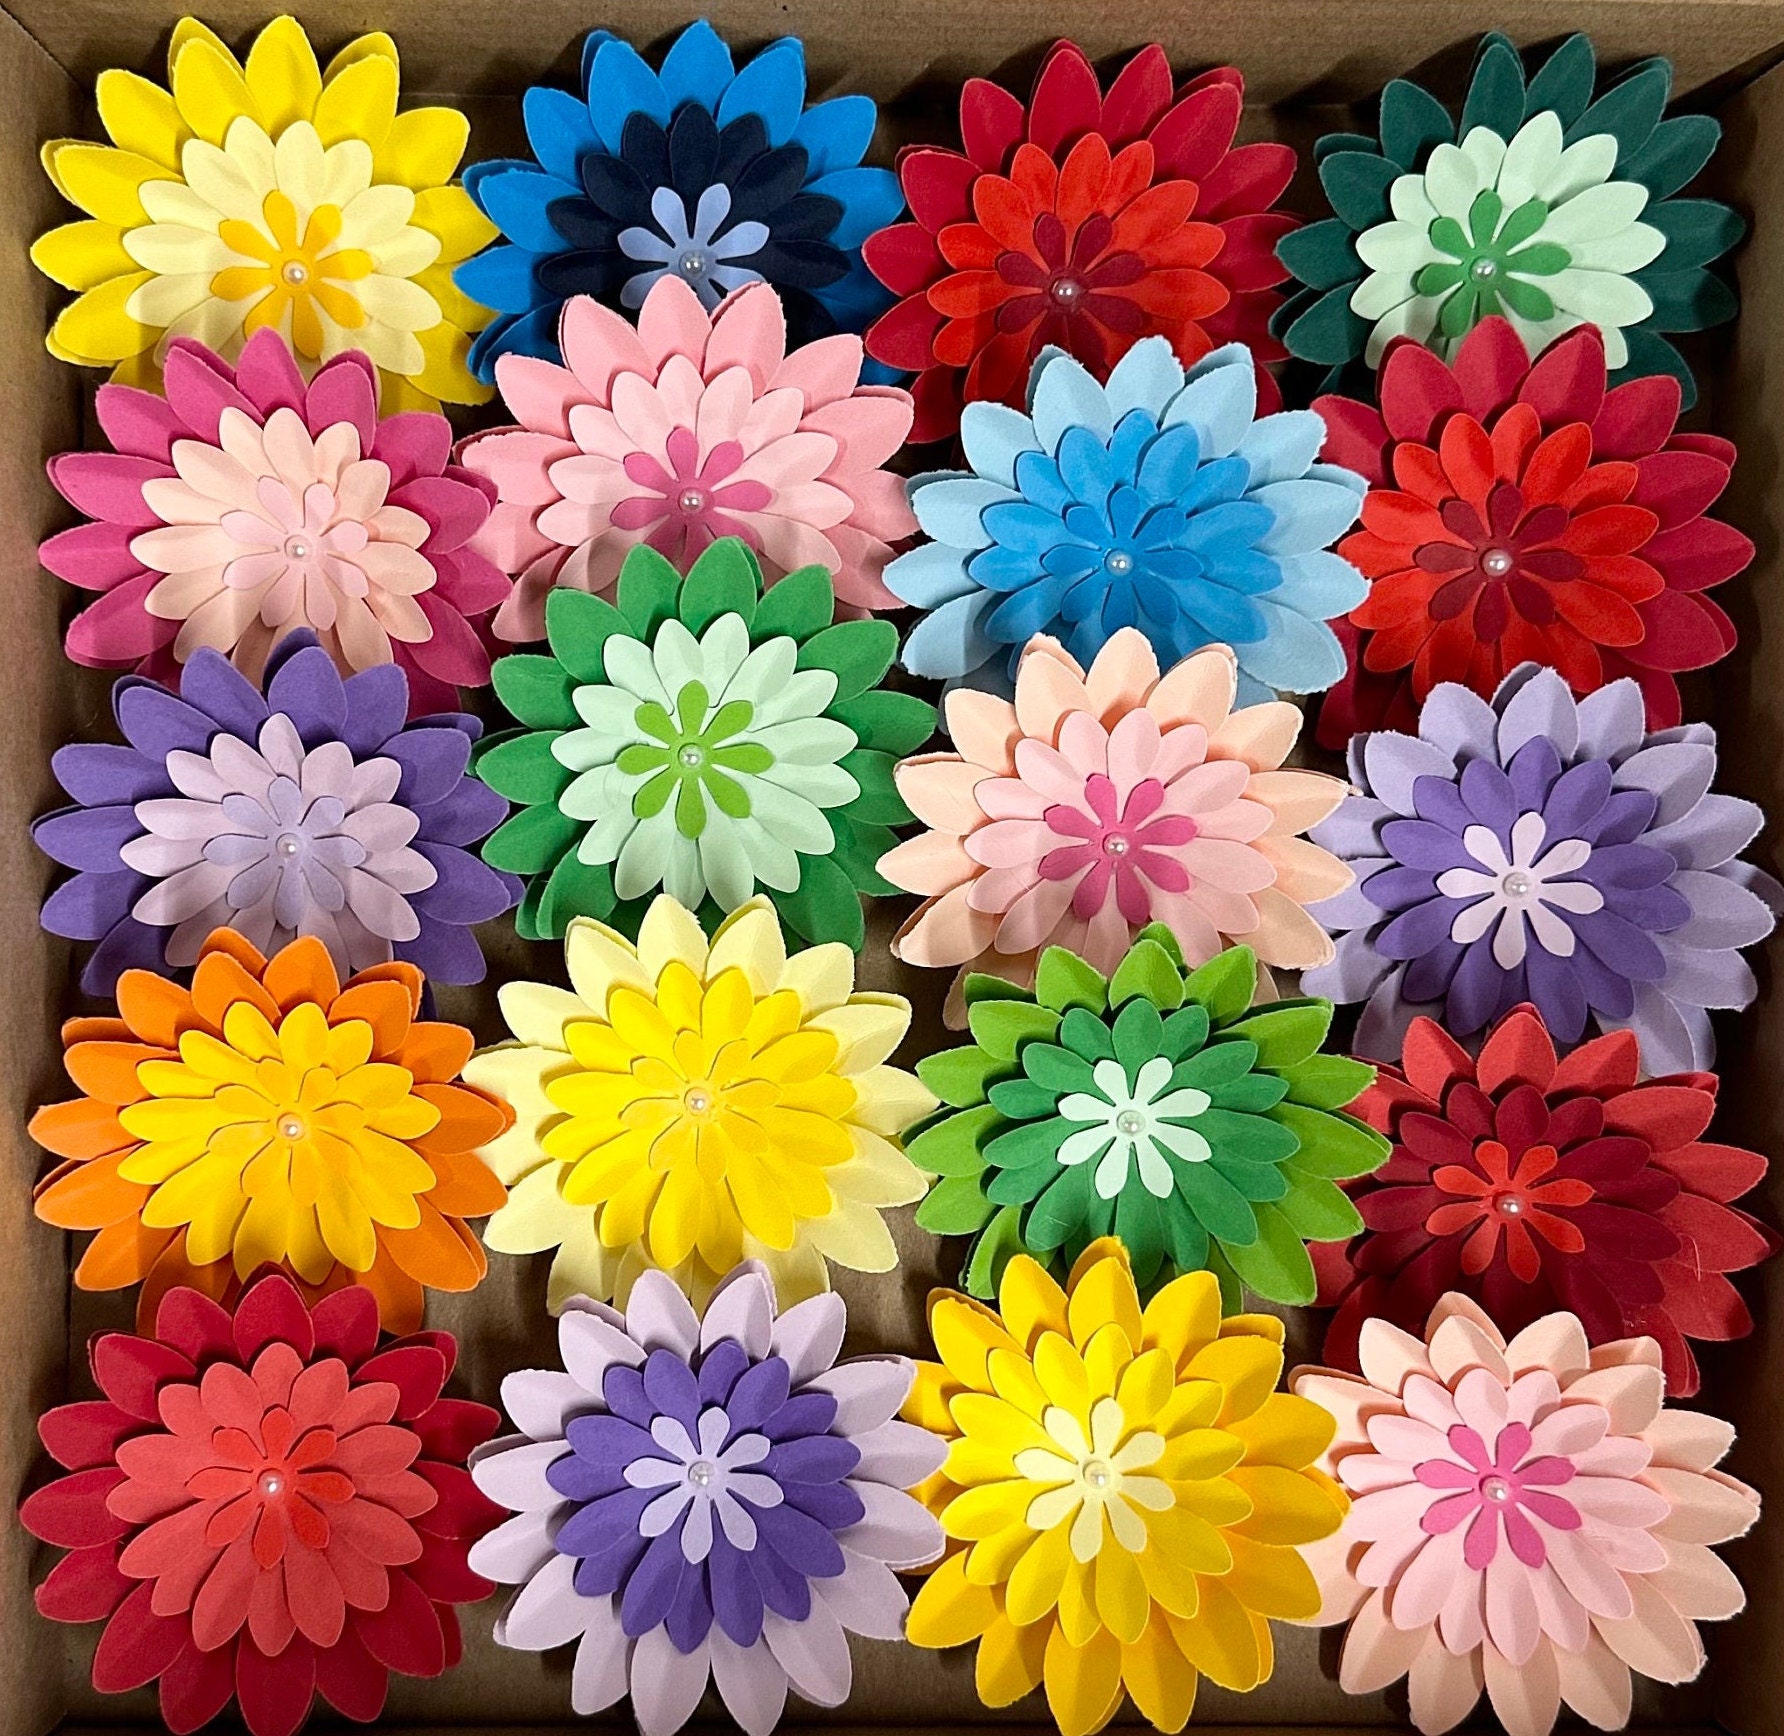 DIY Paper Craft Flowers Handmade Paper Blooms With Pearl Centers Home Decor  Special Events Flower Handcrafted Floral Decorations 